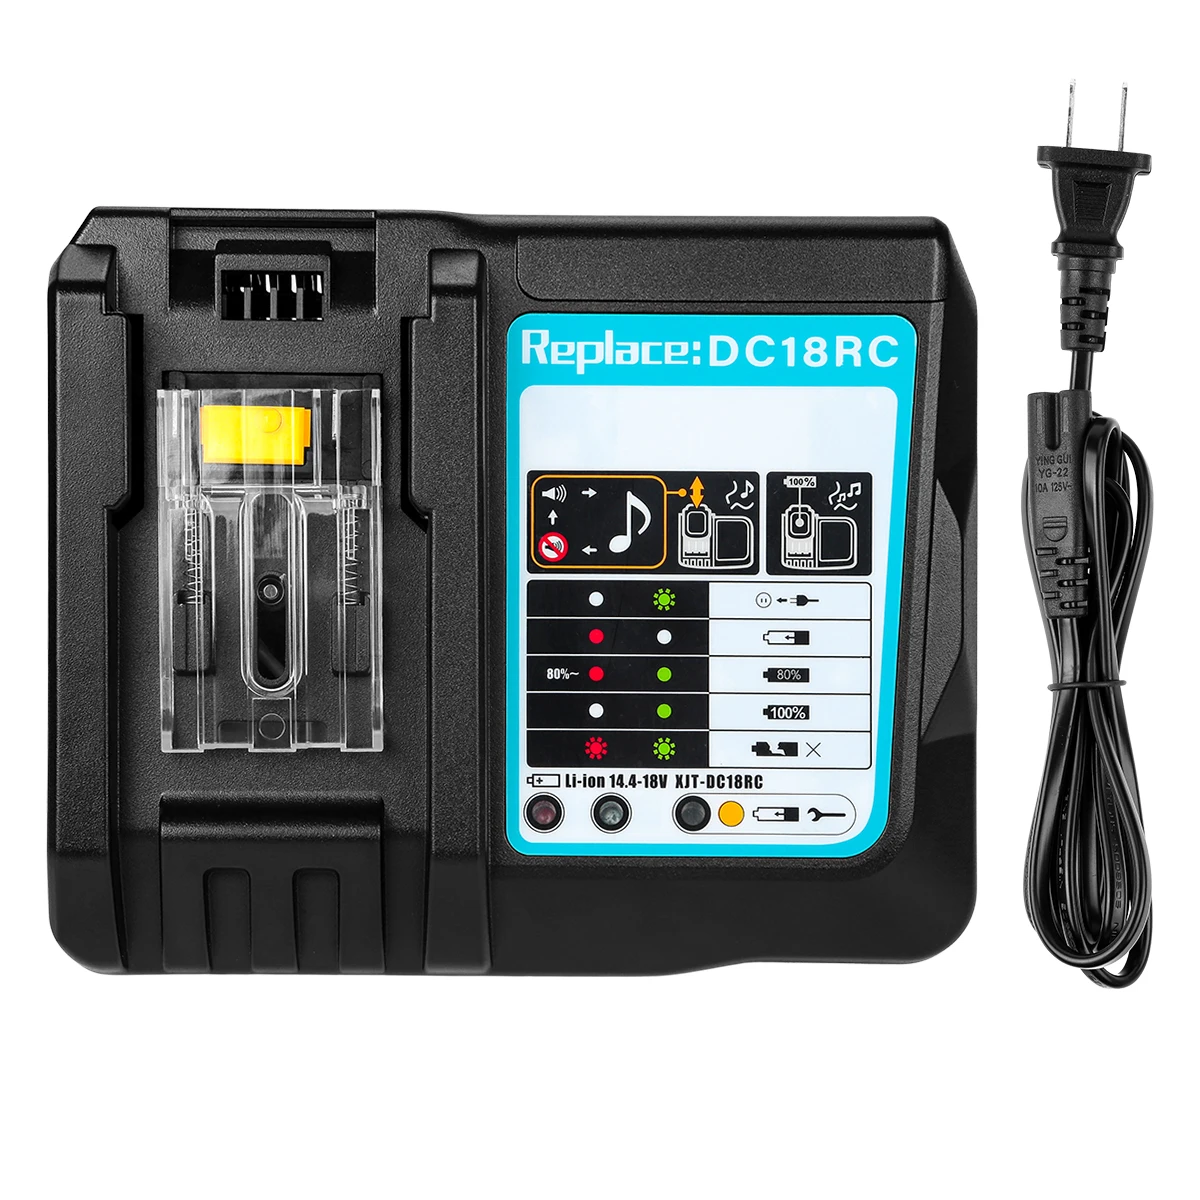 

Li-ion Power Tools Battery Charger for Makita 14v-18v Cordless Drill Charger for Makita Bl1830 Bl1840 Bl1850 Bl1860 Charger, Black